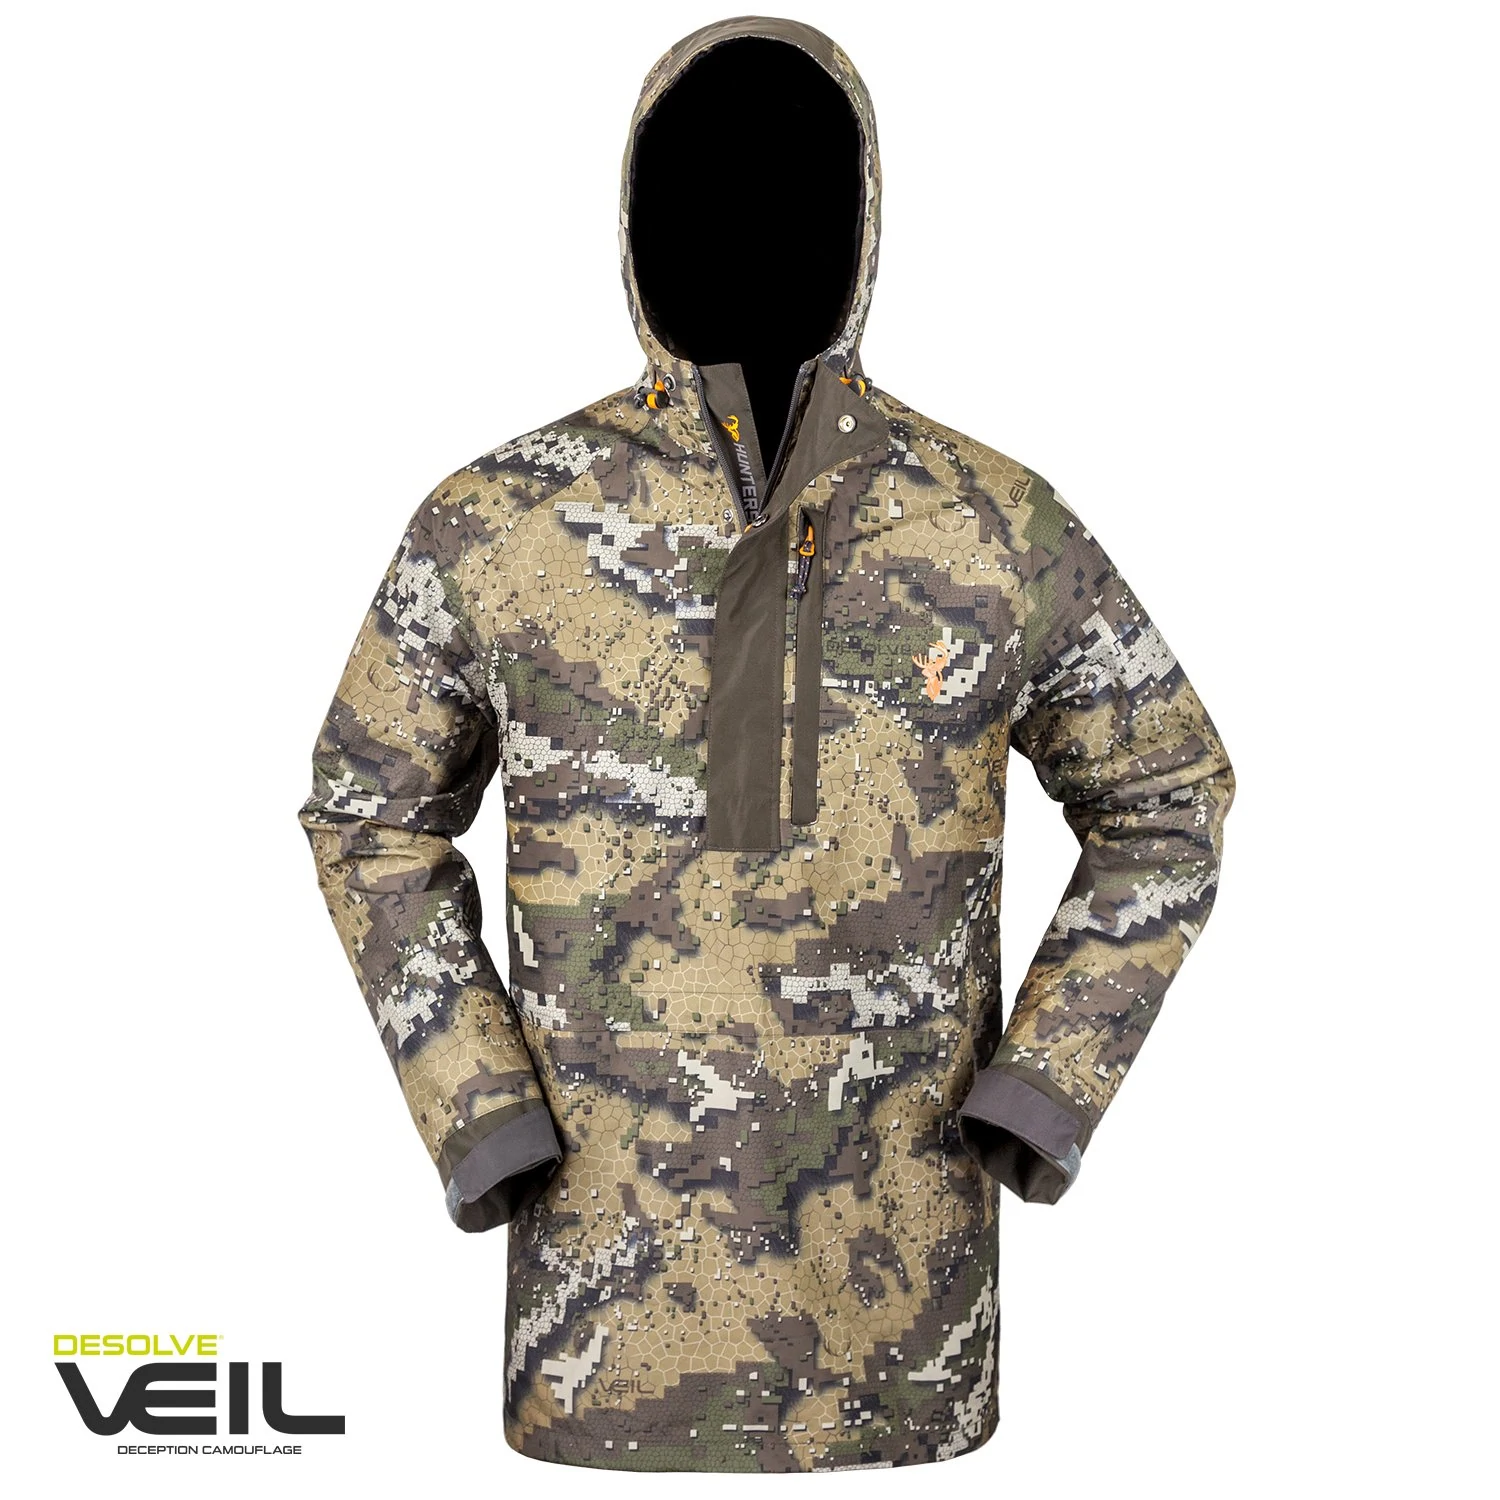 Hunters Element Halo Jacket - Desolve Veil - S / DESOLVE VEIL - Mansfield Hunting & Fishing - Products to prepare for Corona Virus